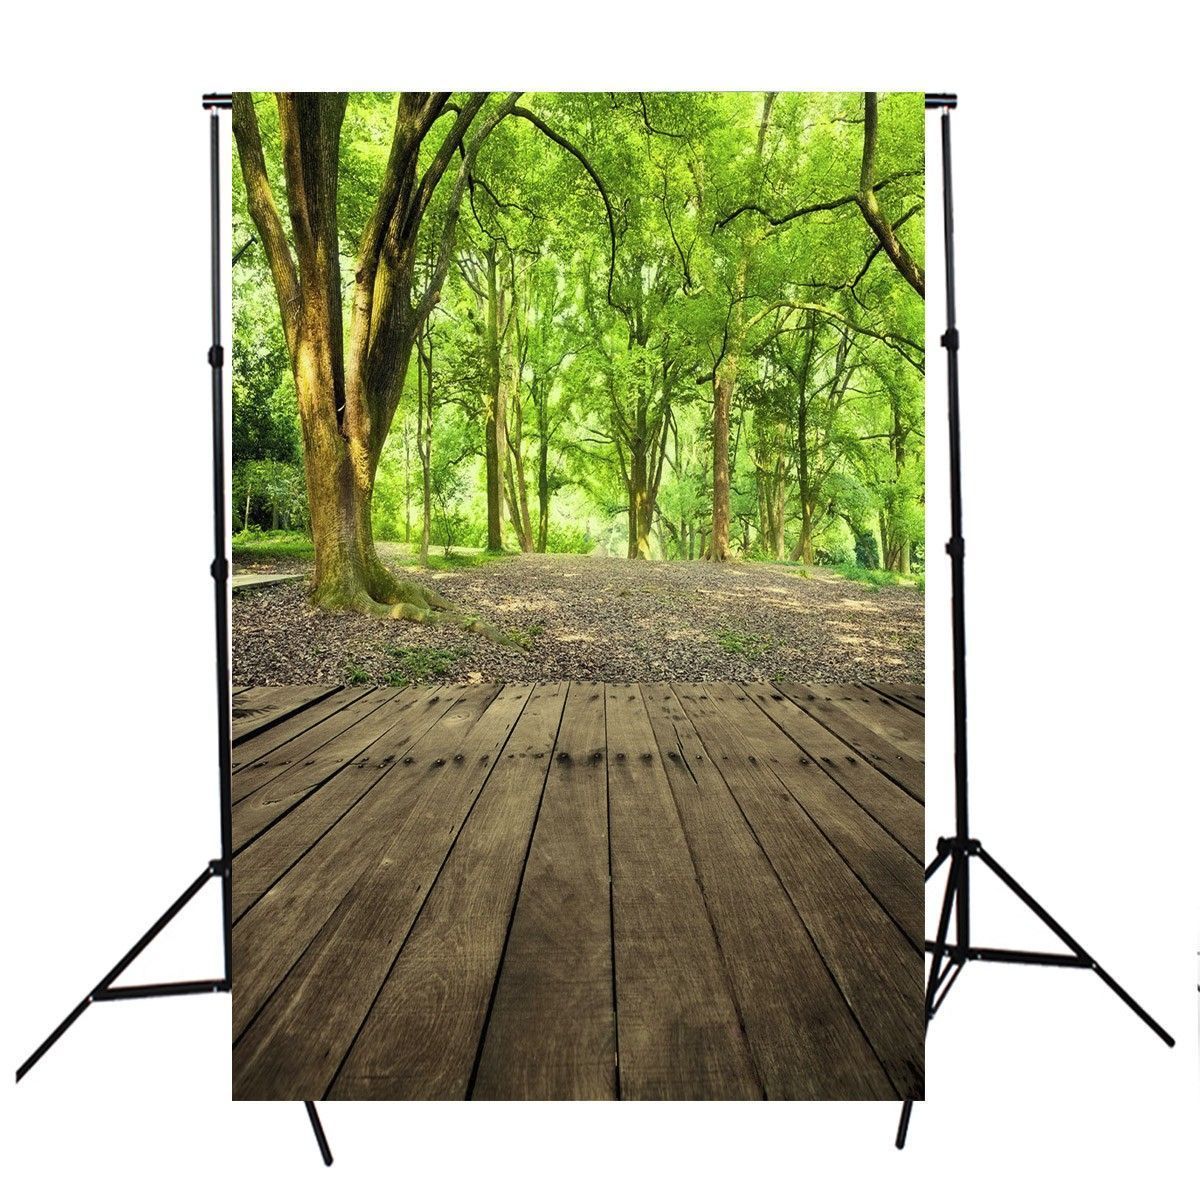 5x7ft-Vinly-Green-Forest-Tree-Floor-Backdrop-Photography-Photo-Background-Studio-Prop-1156841